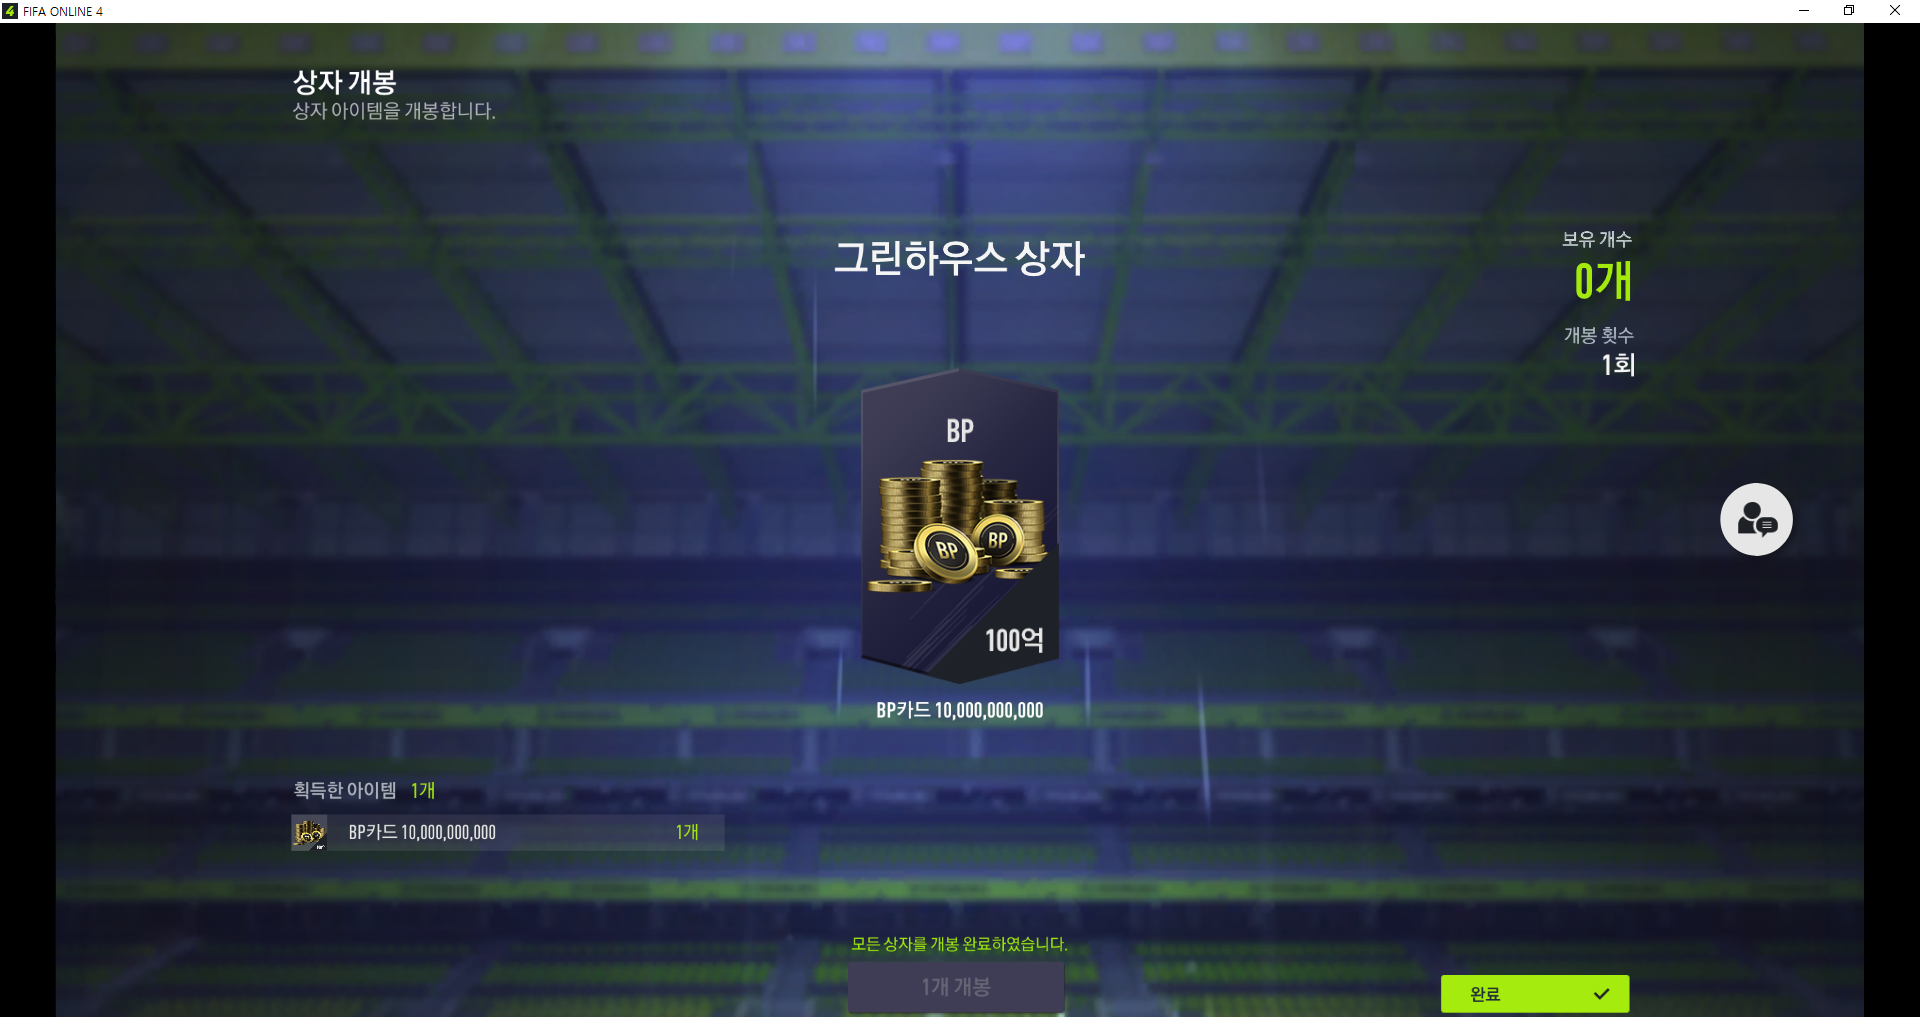 FIFA ONLINE 4 2022-04-28 오후 2_28_17.png